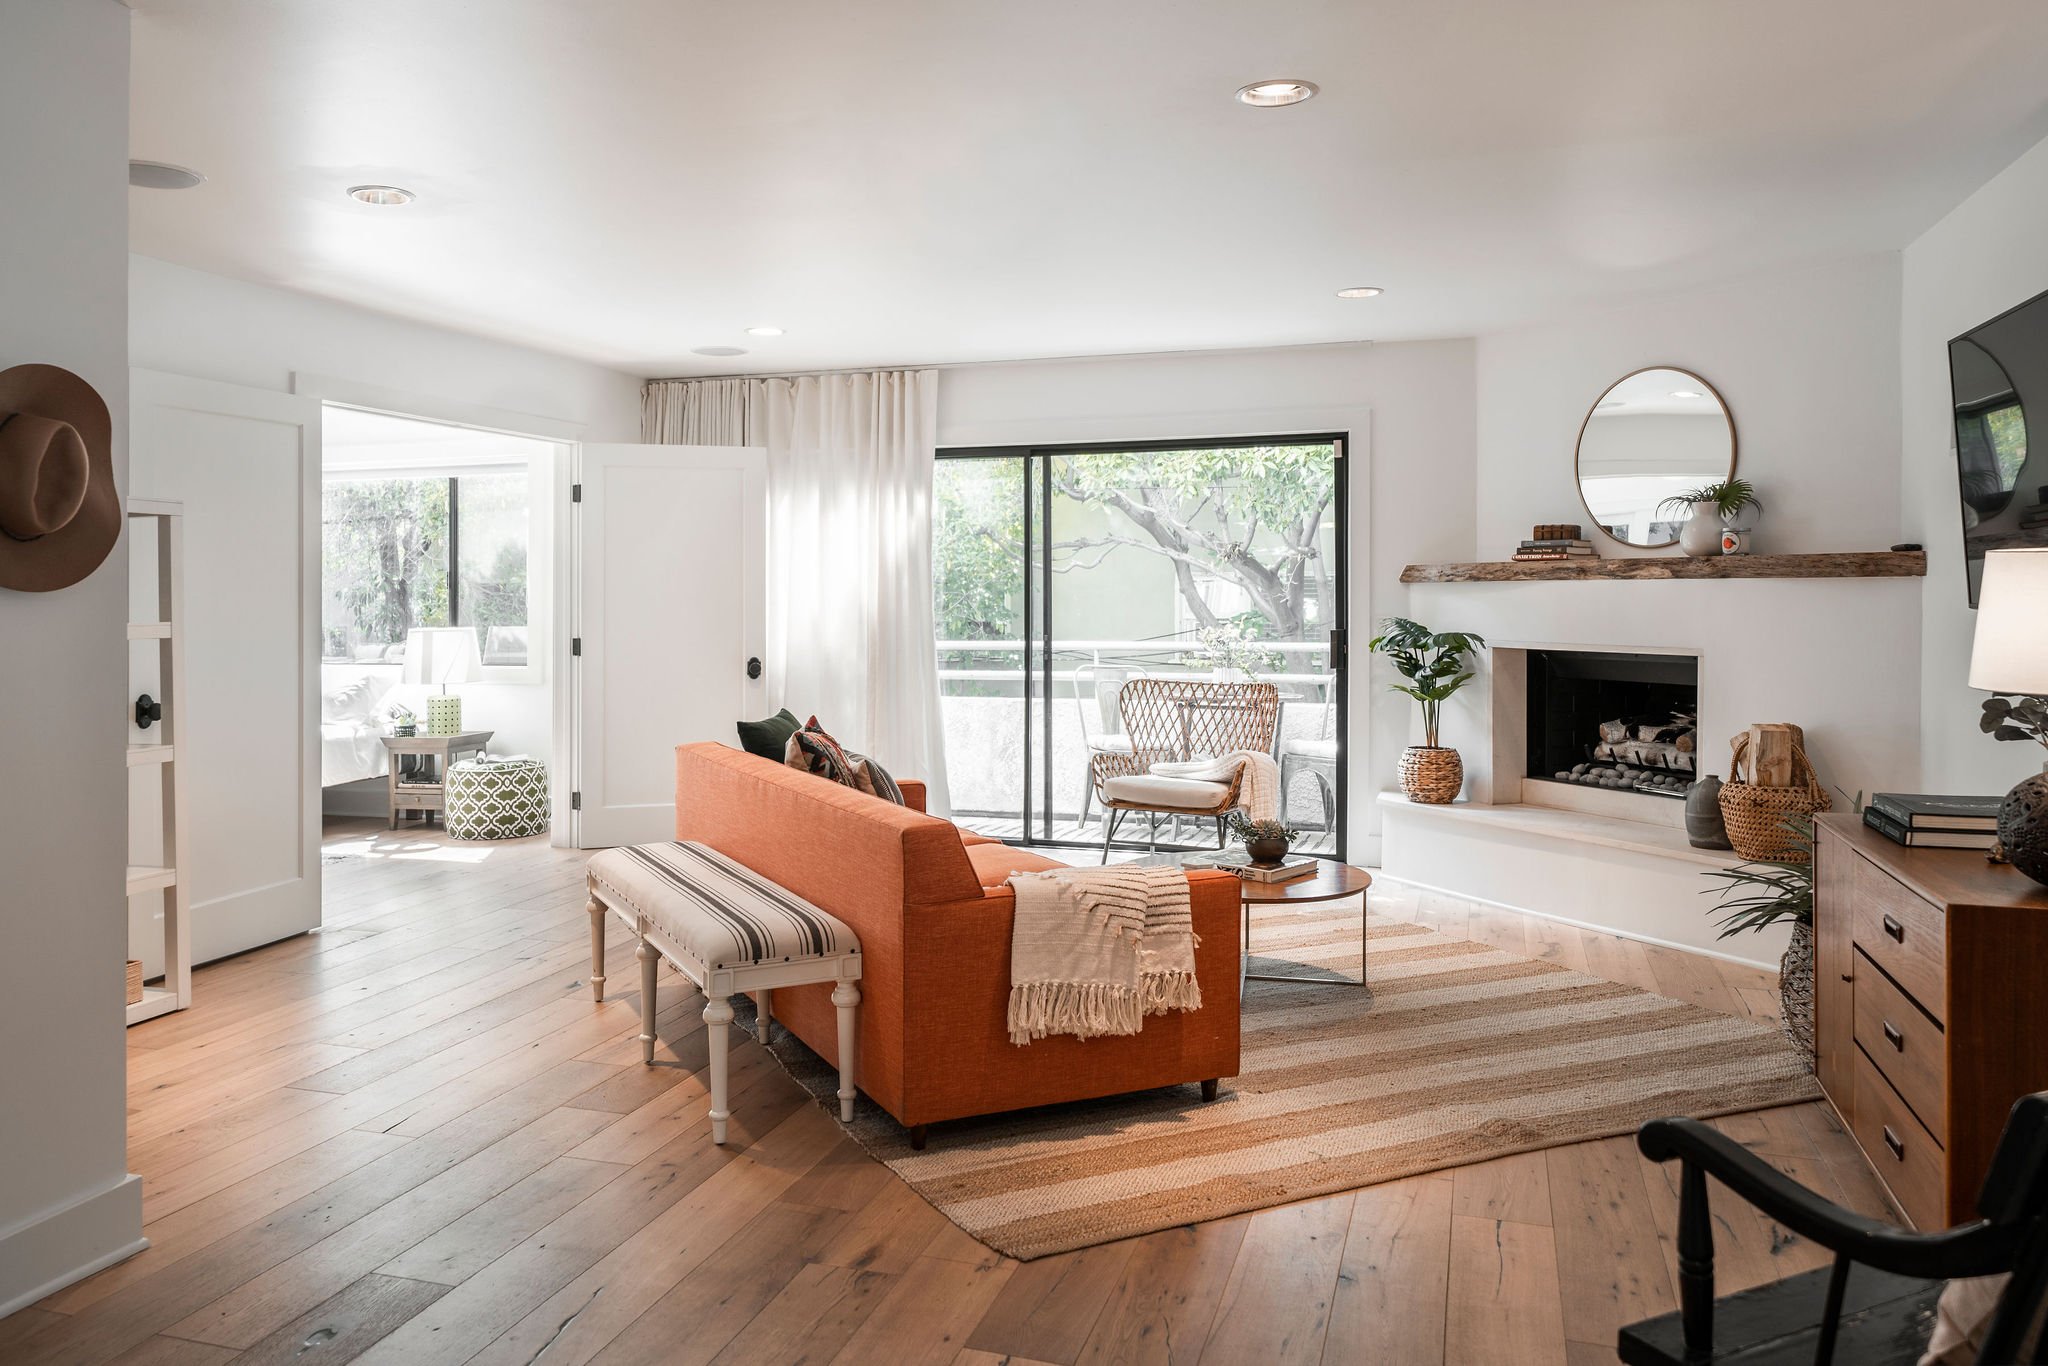 805 N West Knoll Dr #3, West Hollywood Sold - $1,077,000